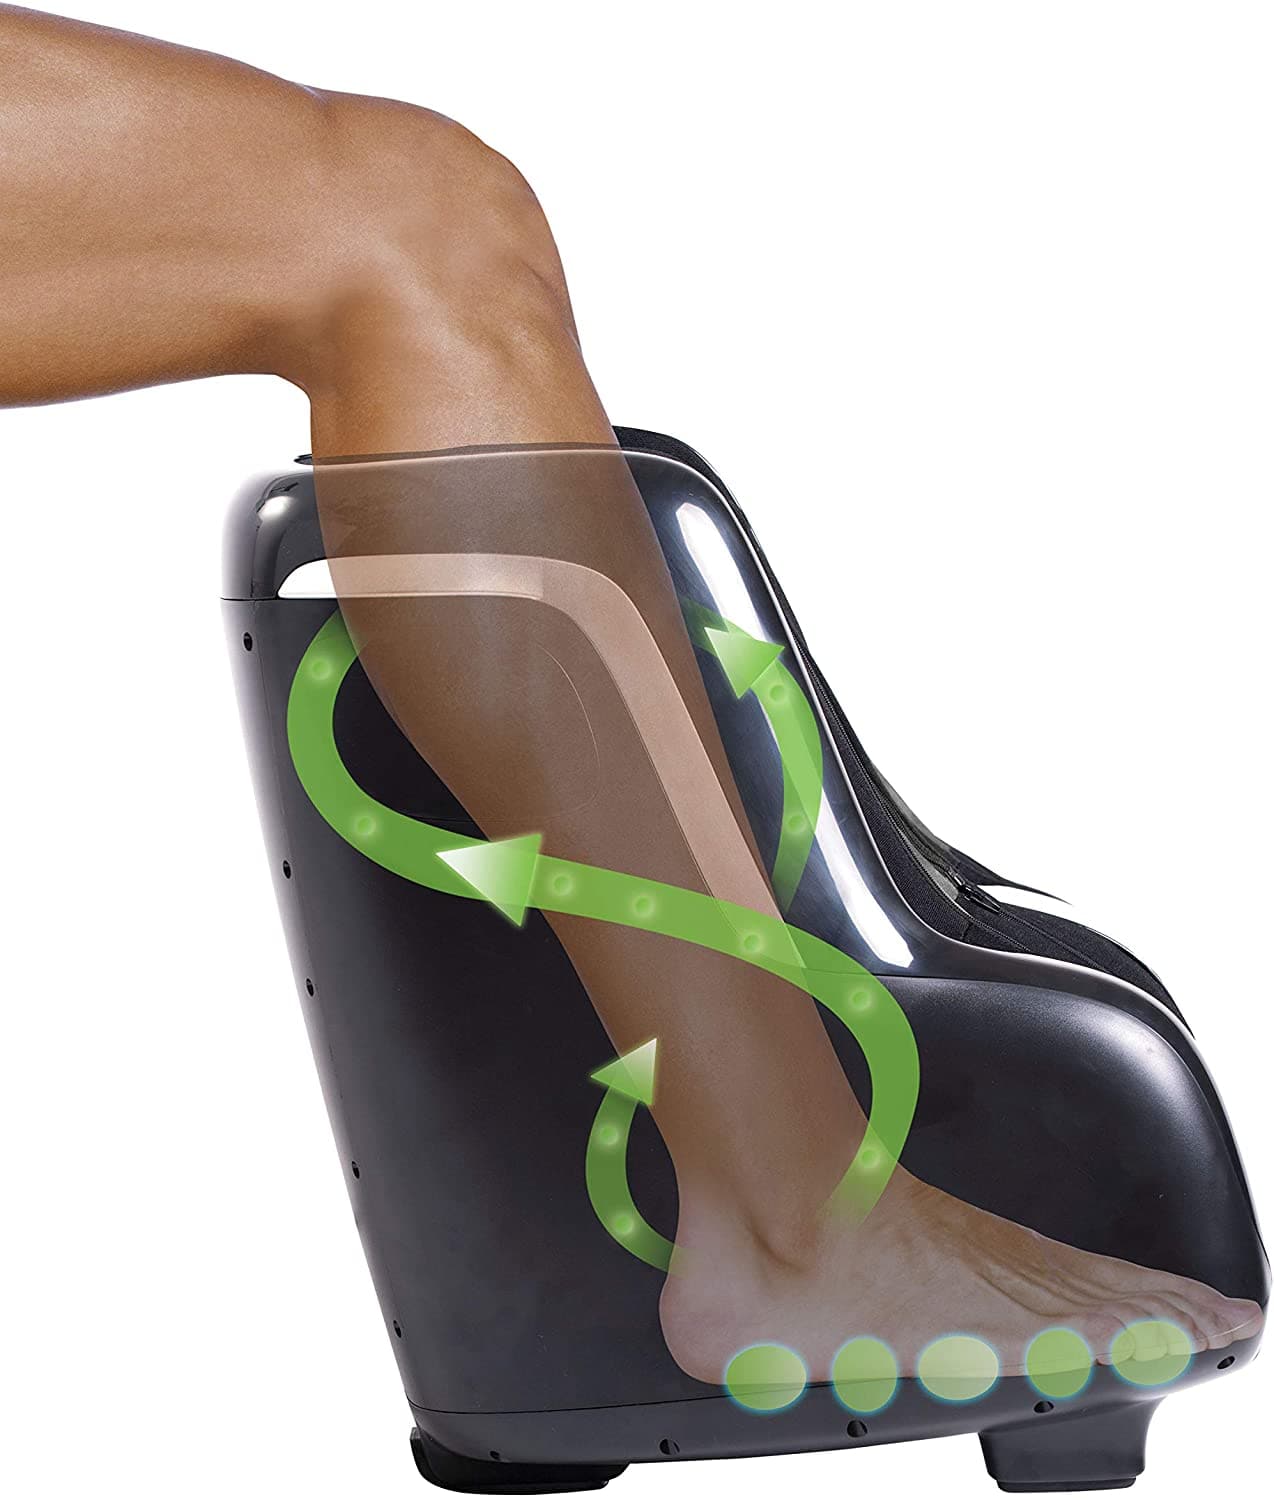 Human Touch Reflex5s Foot And Calf Massager Perfect For Relaxation